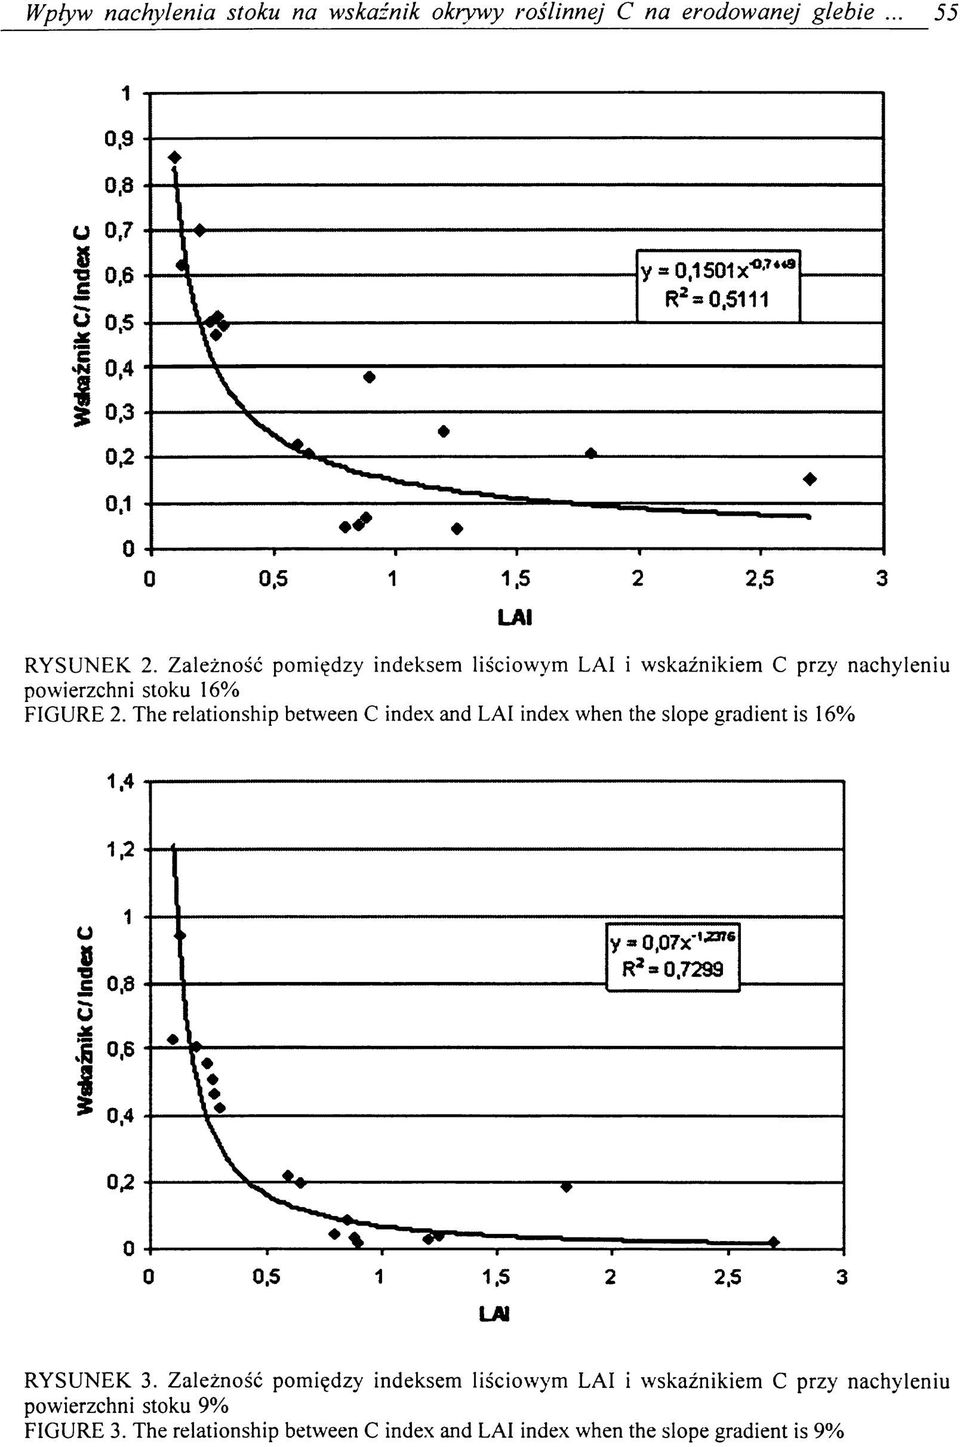 The relationship between C index and LAI index when the slope gradient is 16% RYSUNEK 3.